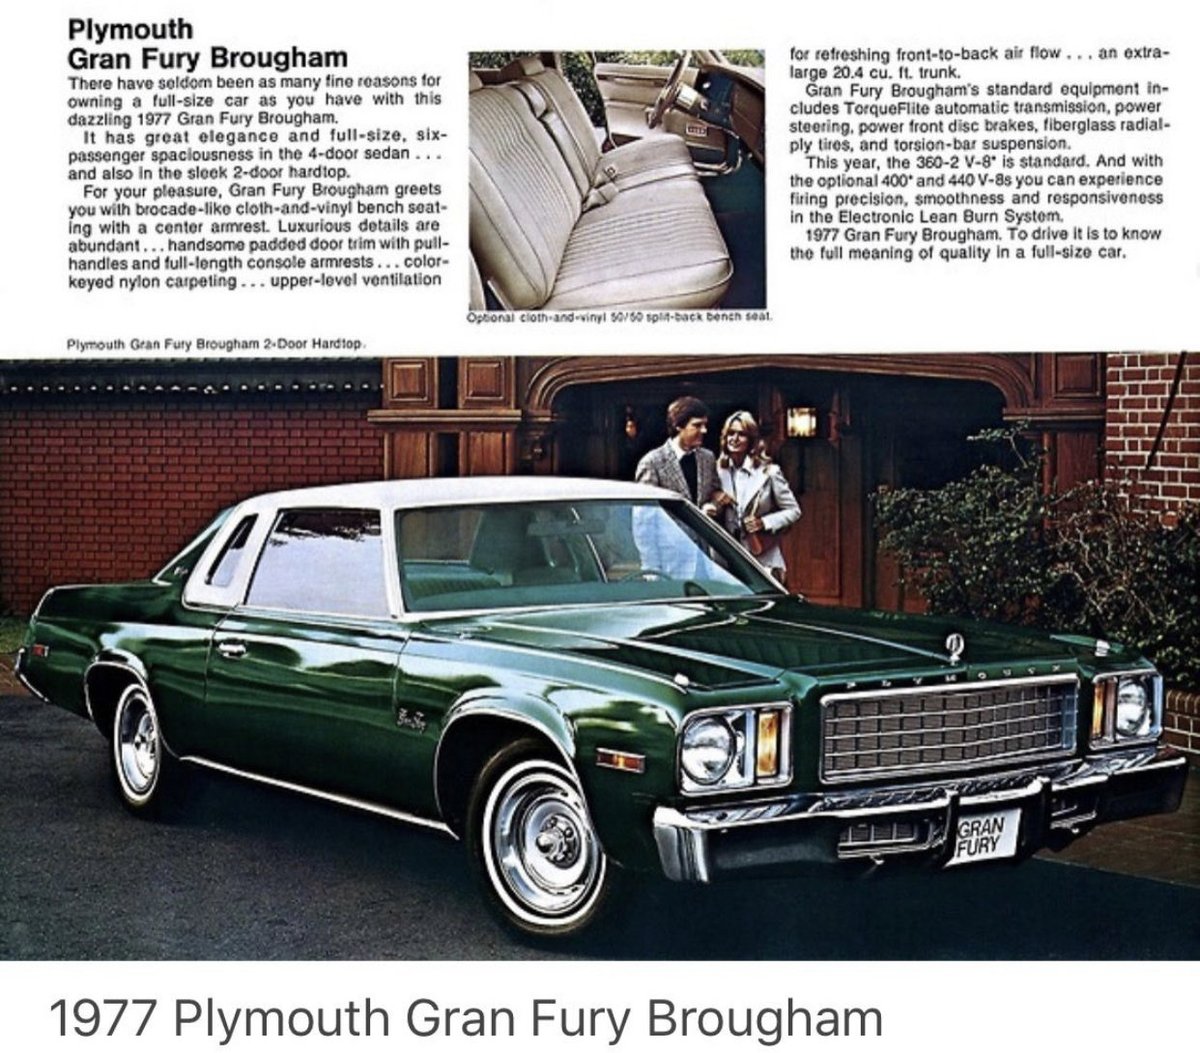 By 1977, luxury was available for the masses as performance took a back seat. Big Three buyers had their choice of the Ford LTD Landau, the newly-downsized Chevrolet Caprice Landau Coupe, or the Plymouth Gran Fury Brougham.